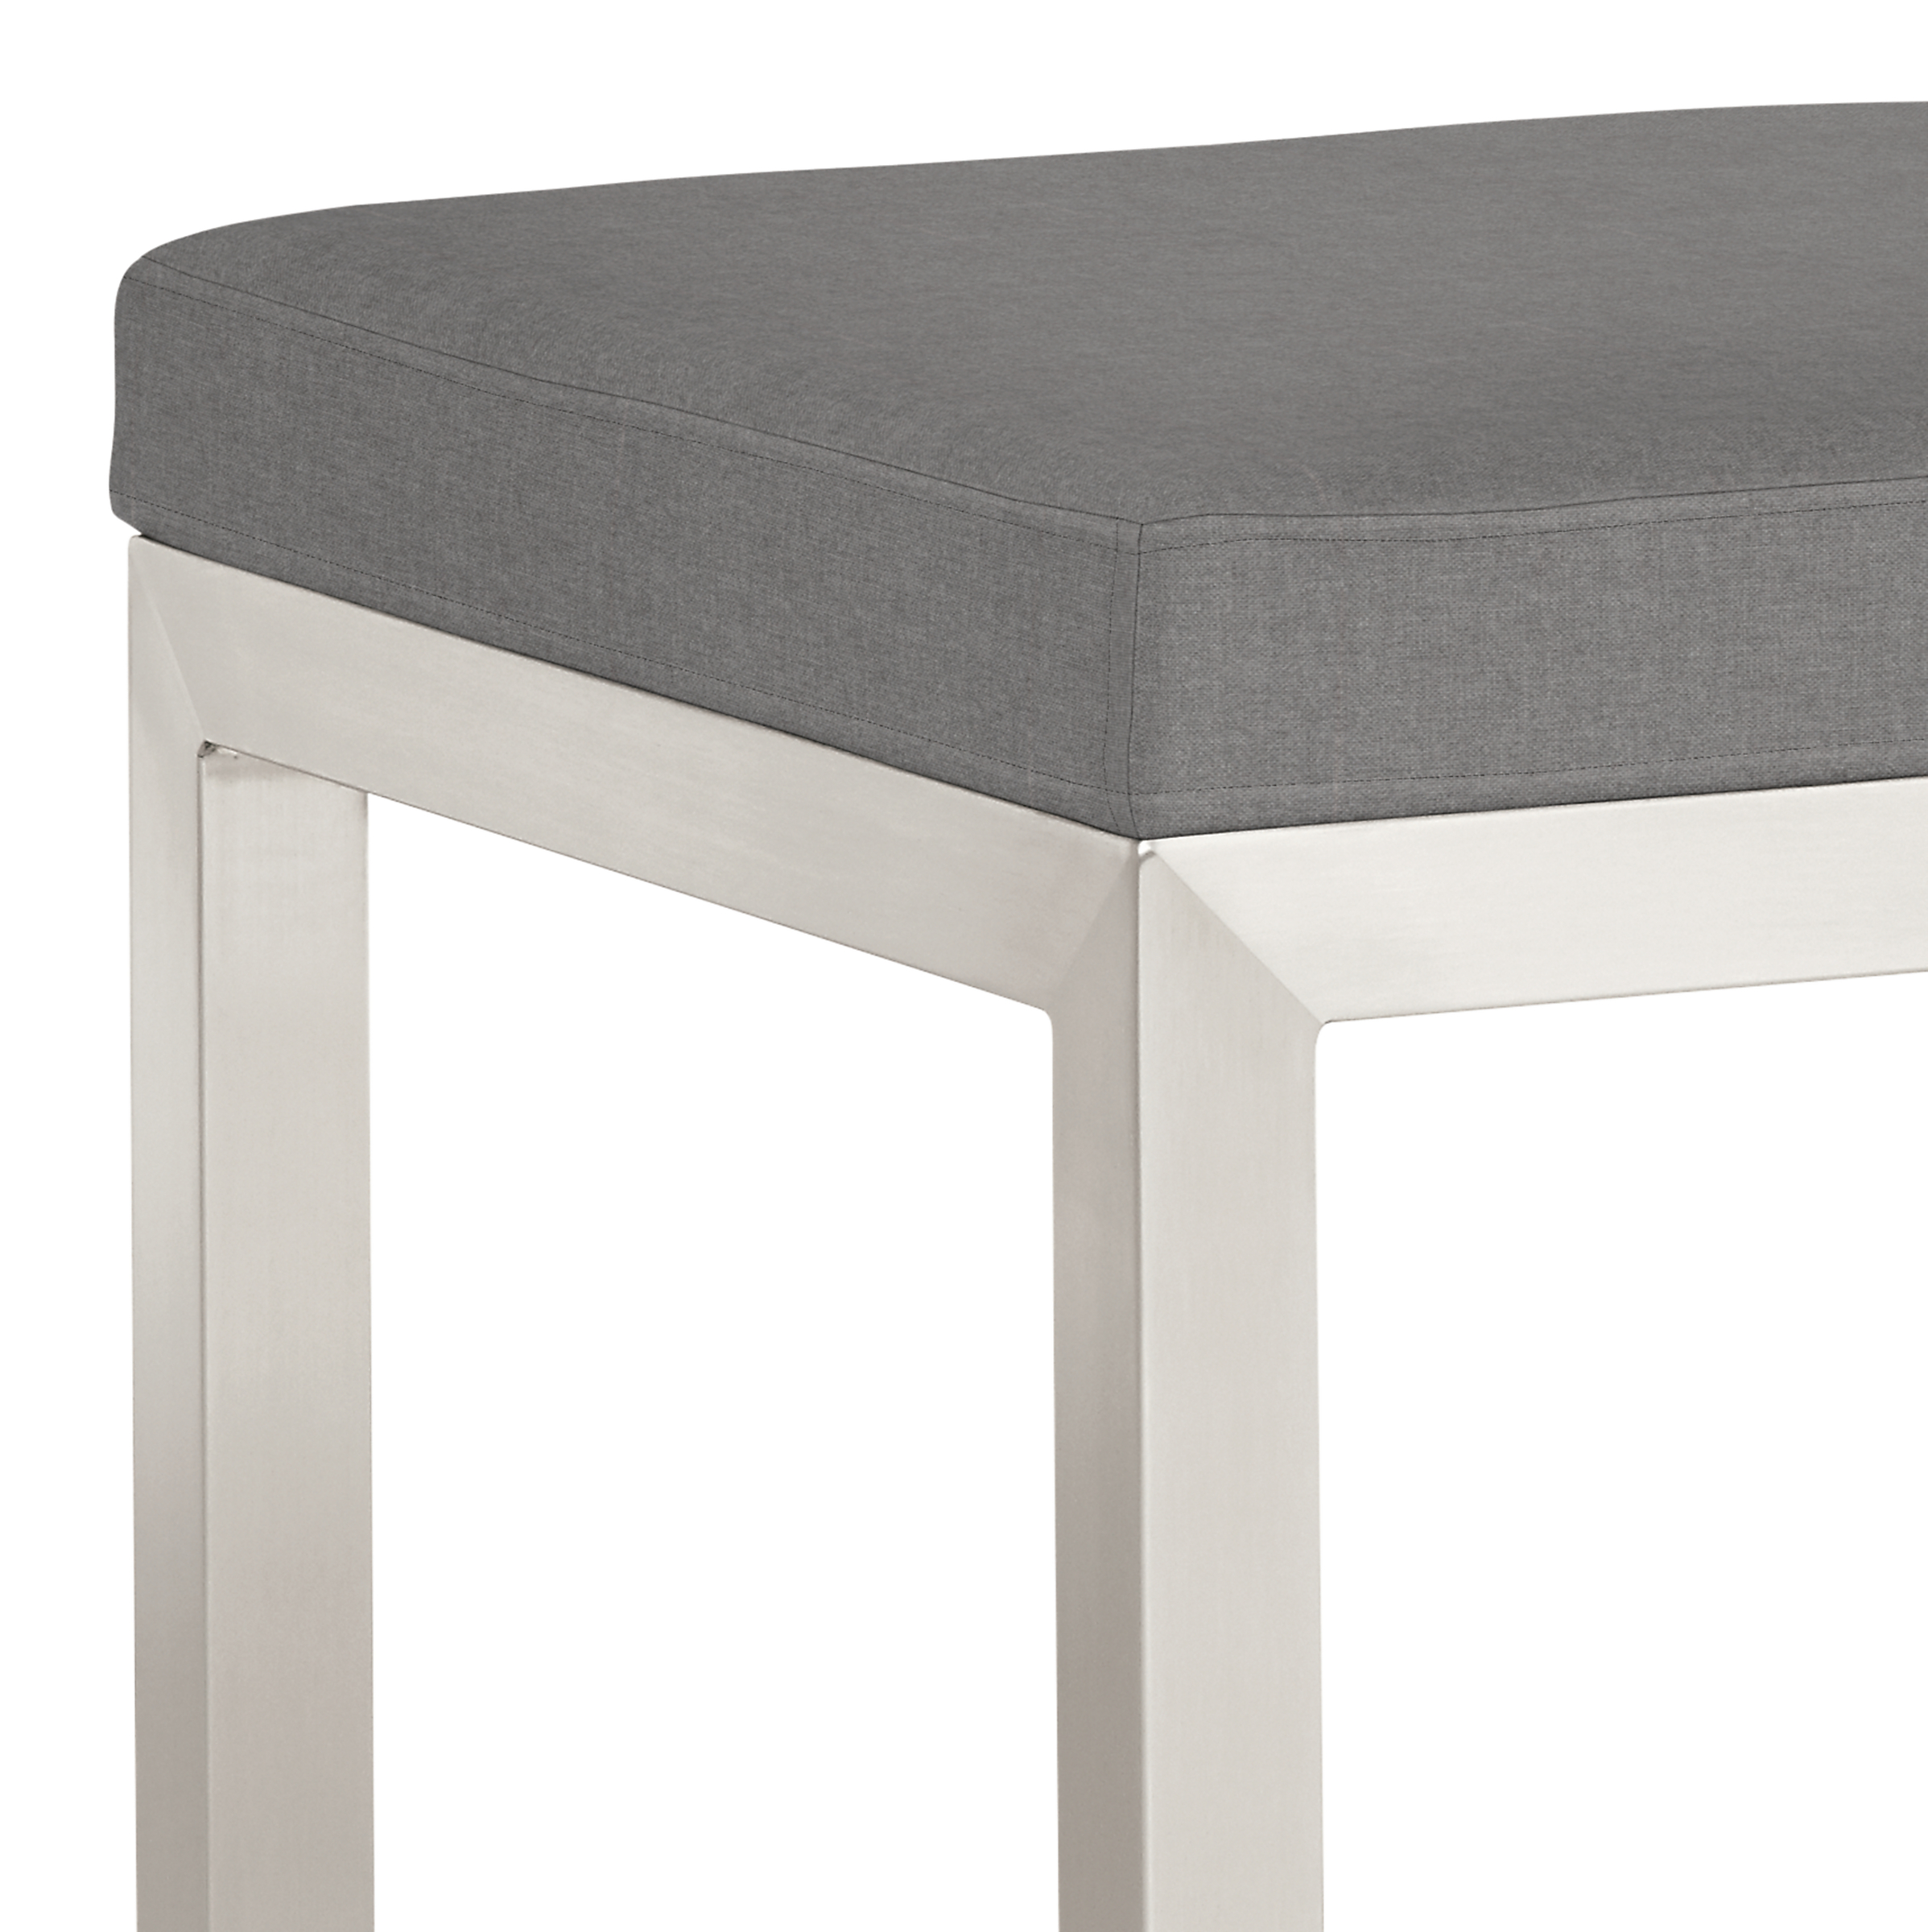 Detail of Parsons 46-wide Bench in Sunbrella Canvas Slate with Stainless Steel 1.5" Base.